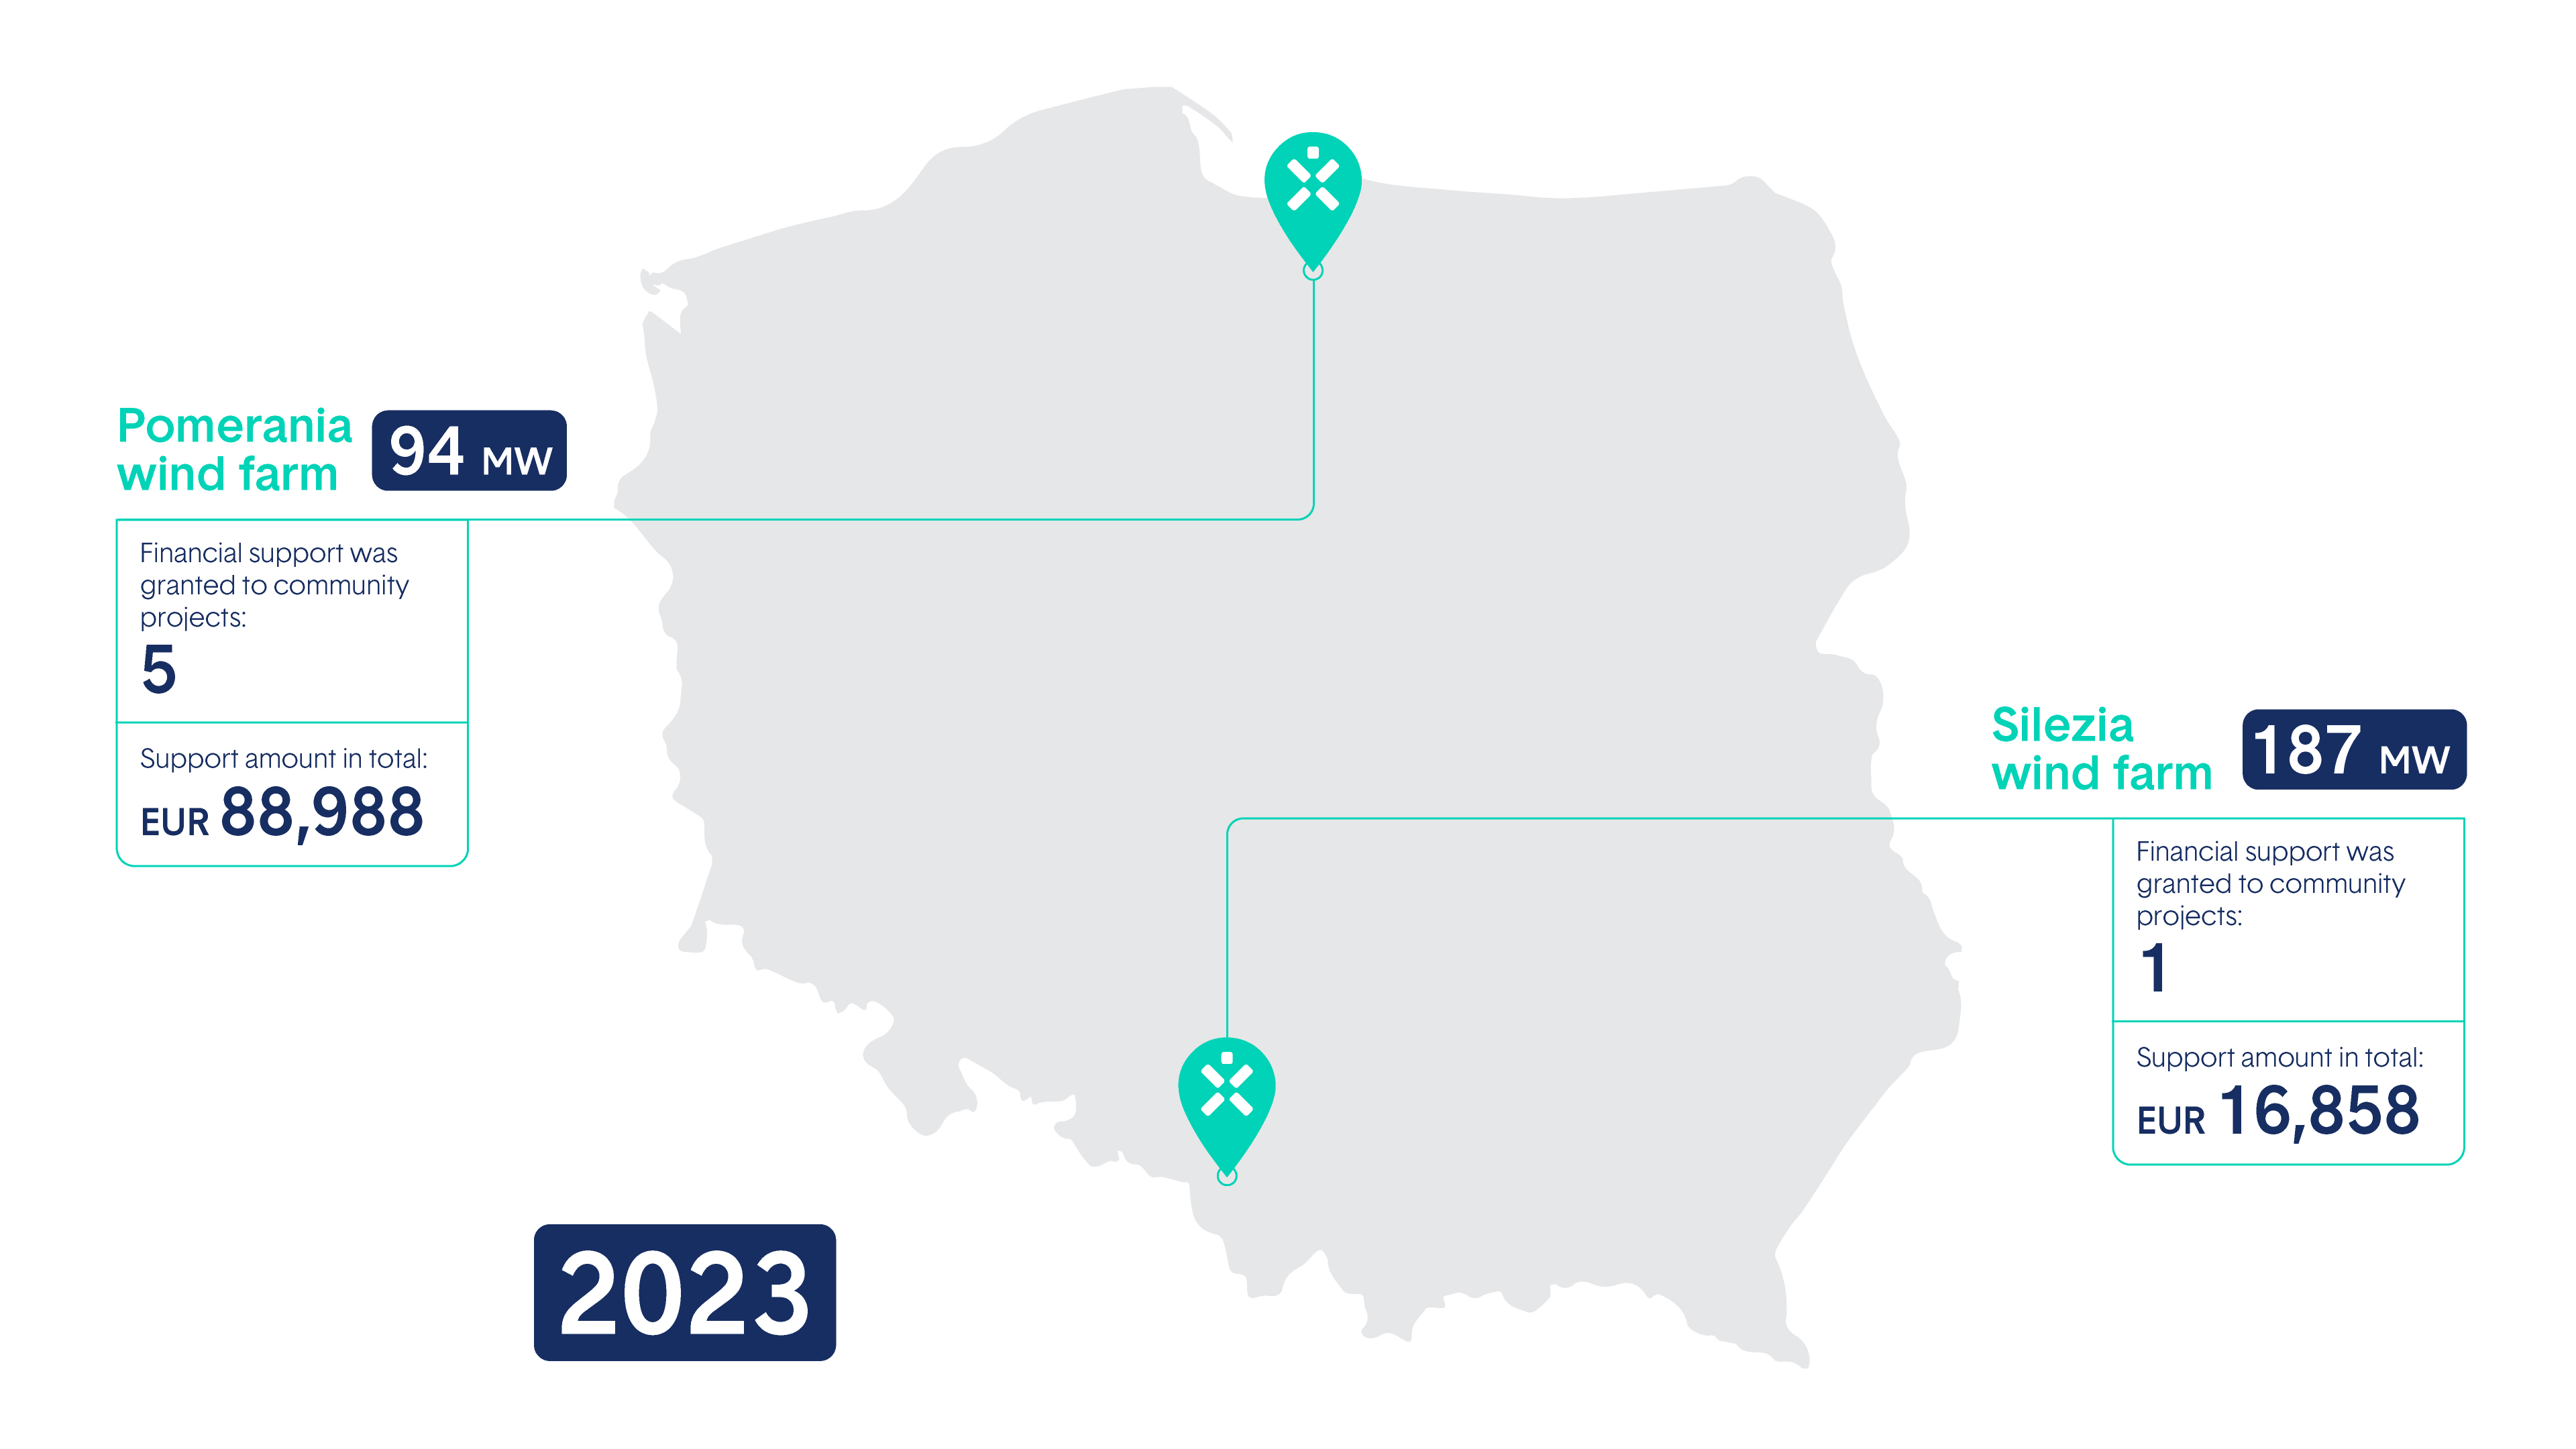 Support to communities in Poland 2023